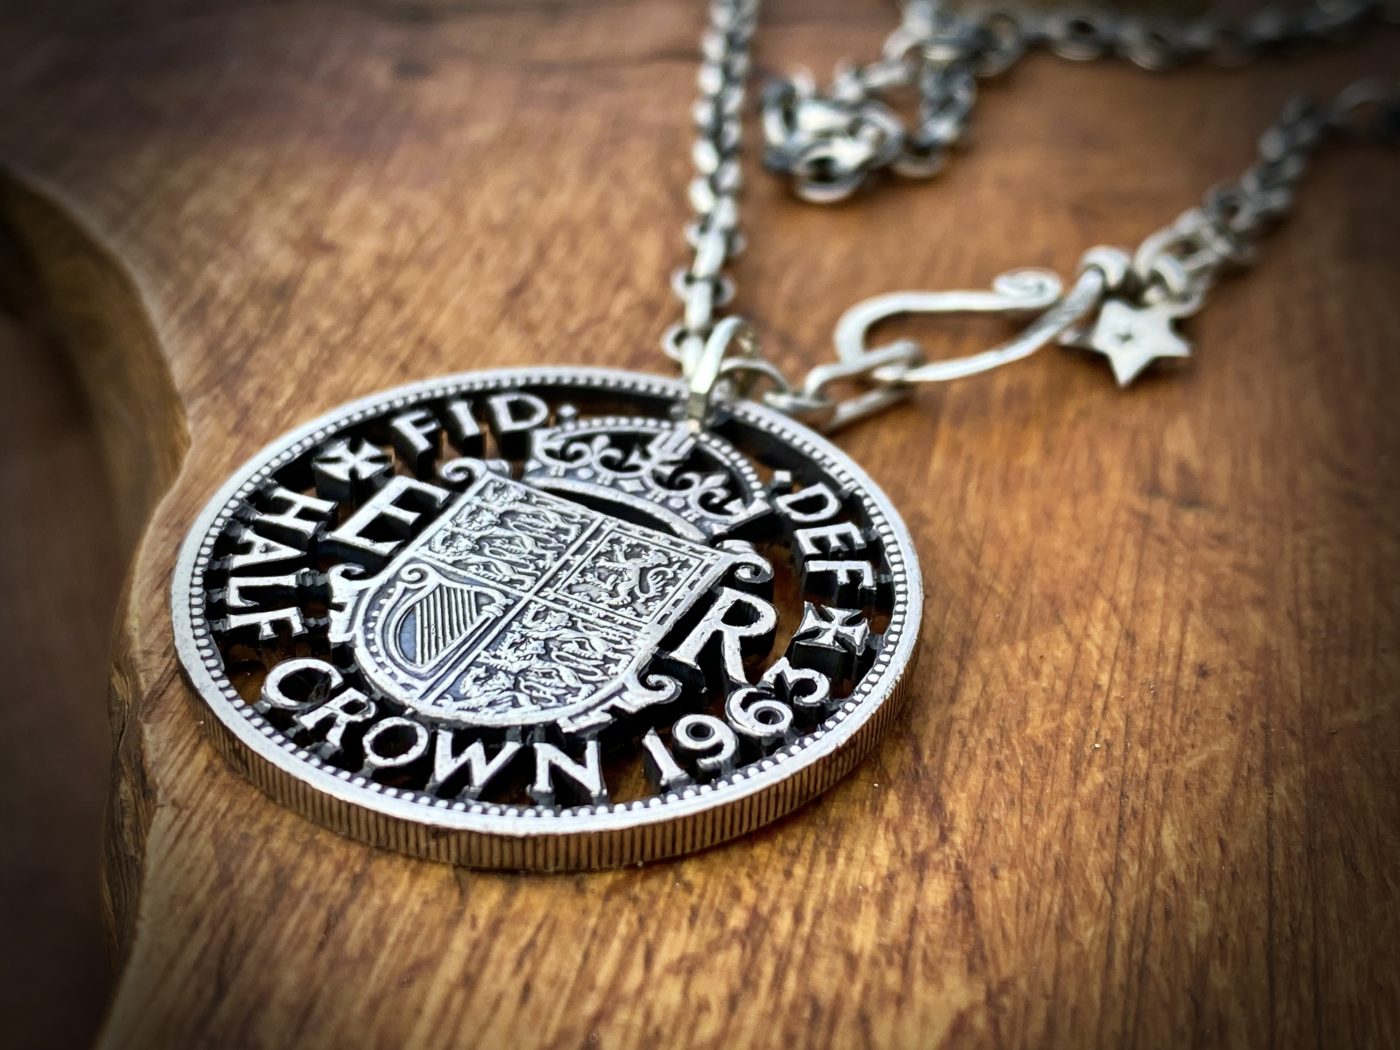 1963 coin necklace celebrating 60th birthday